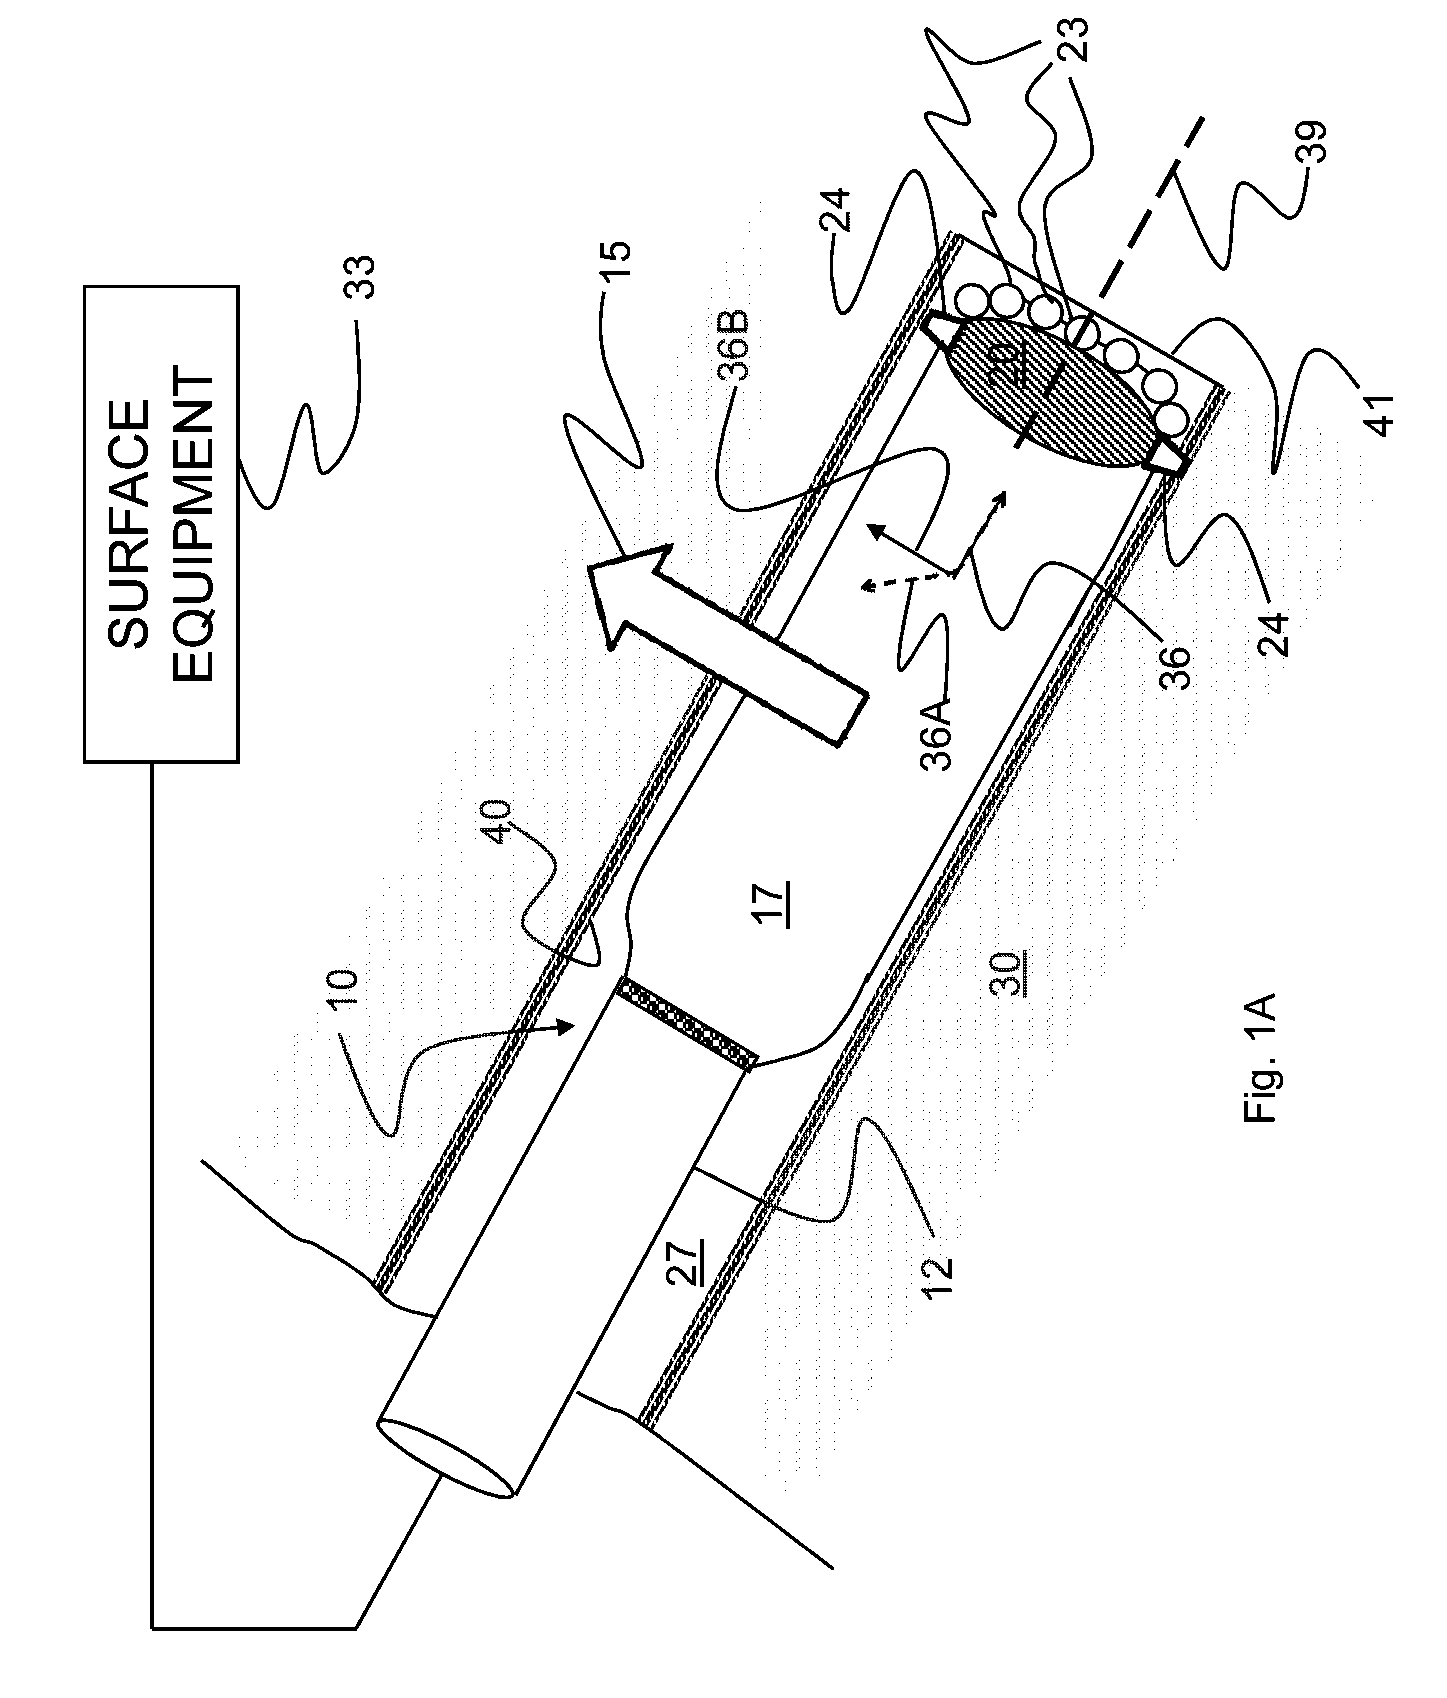 System and method for directional drilling a borehole with a rotary drilling system